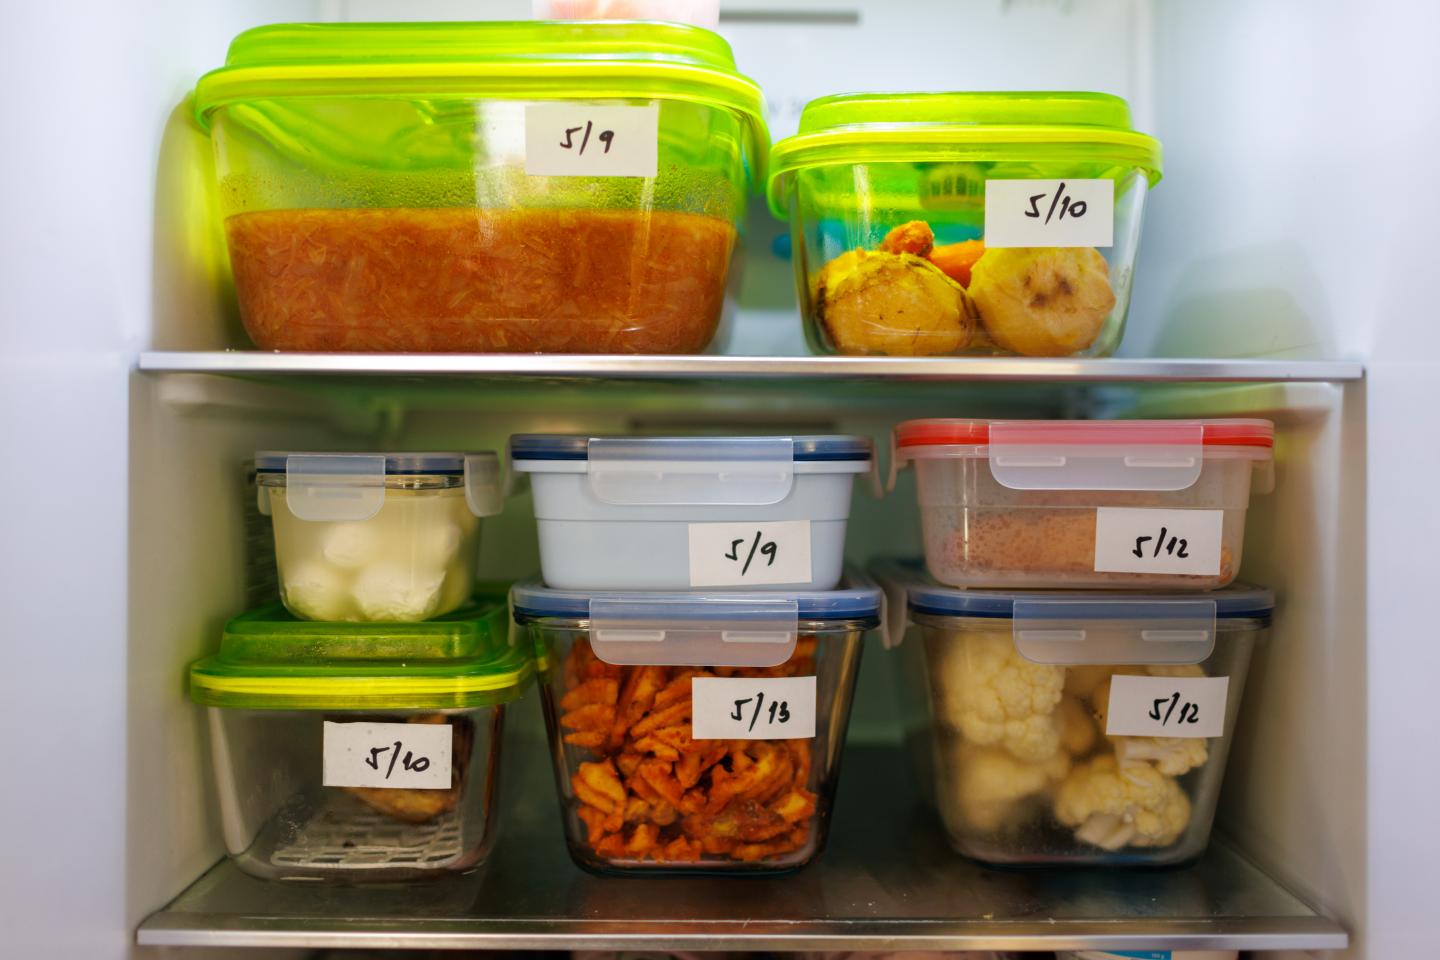 Leftovers in the refrigerator stacked in clear containers and labeled with dates 